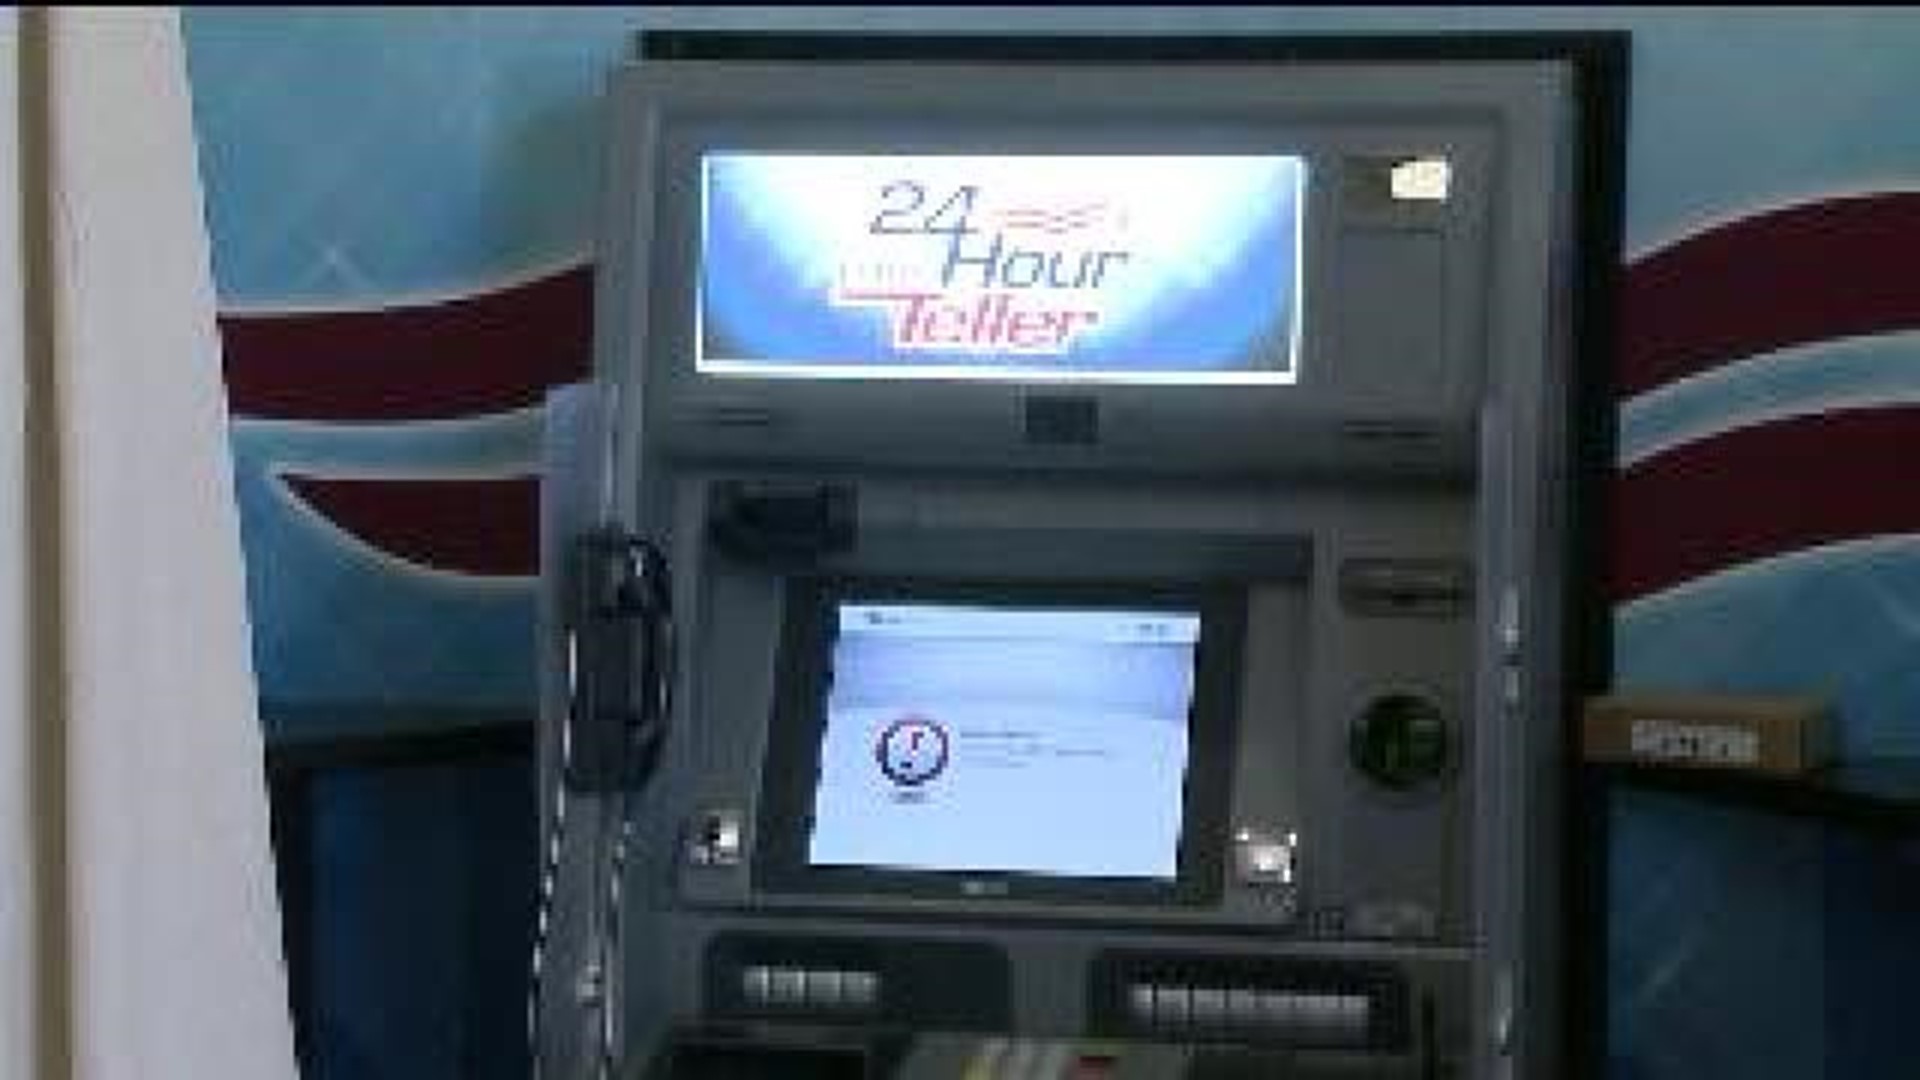 Credit Union Offers “Face-to-face” Banking 24/7